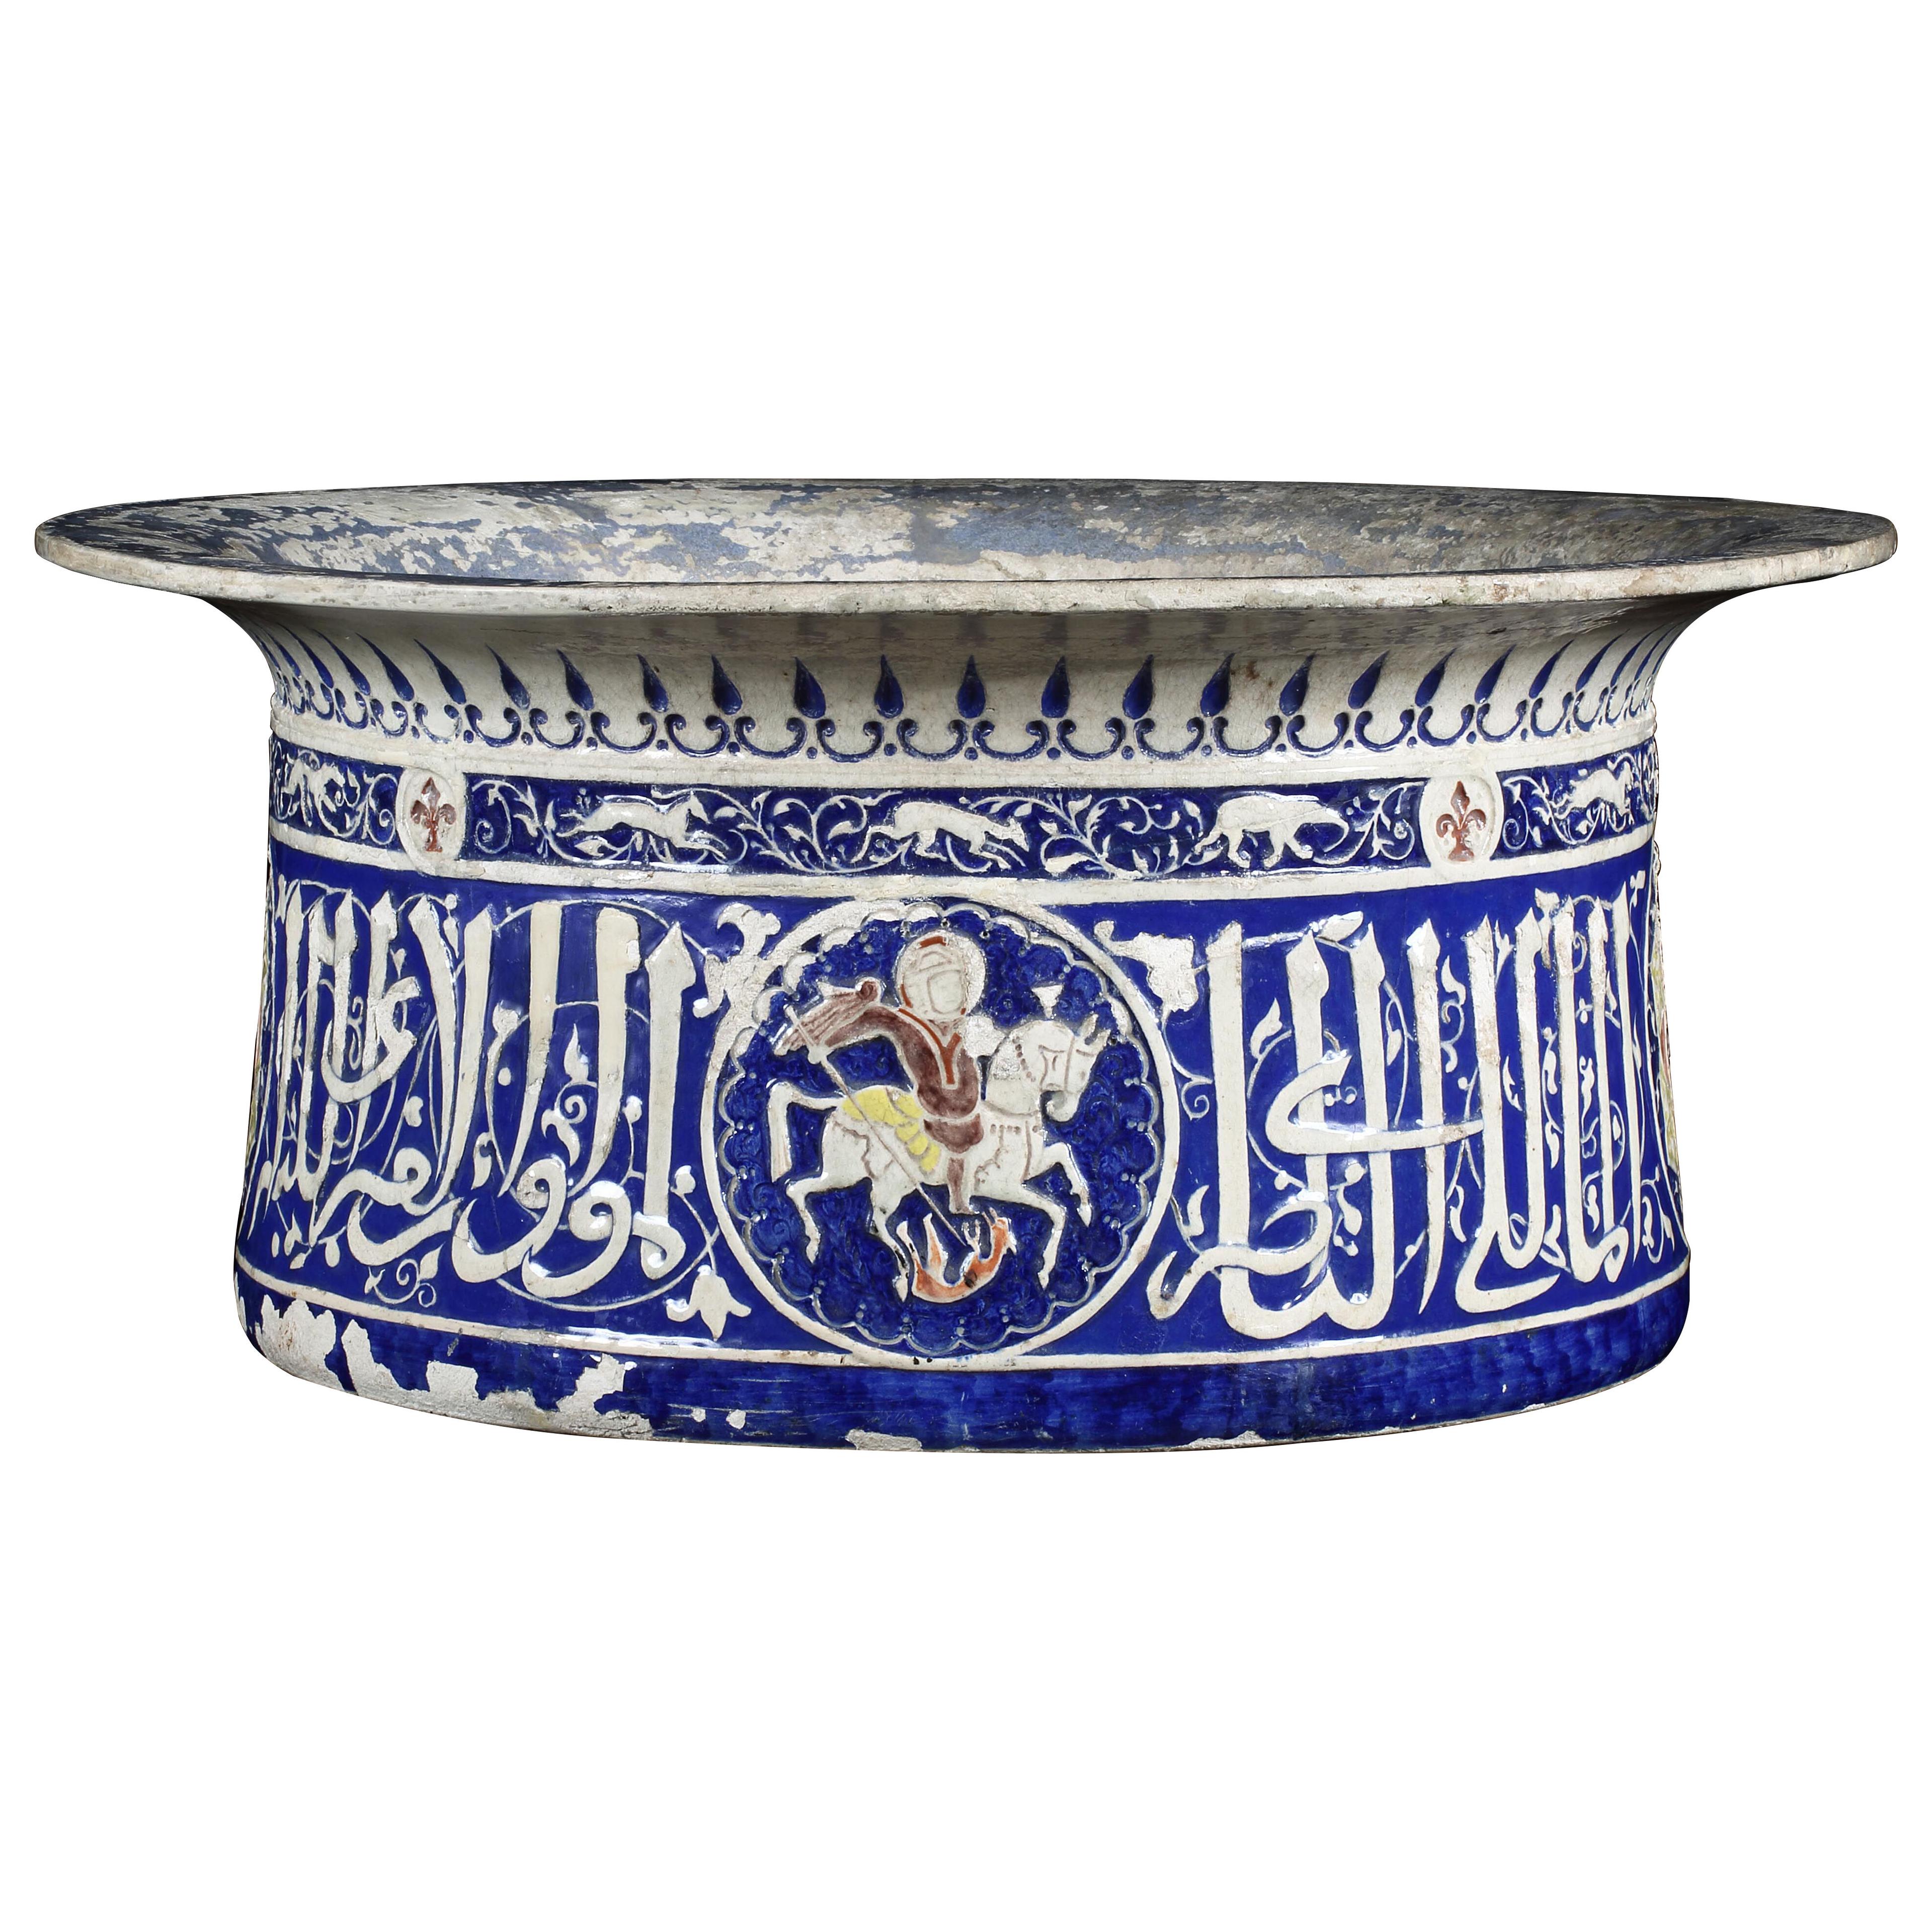 A late 19th century Mamluk style ceramic basin, attributed to Collinot & Cie